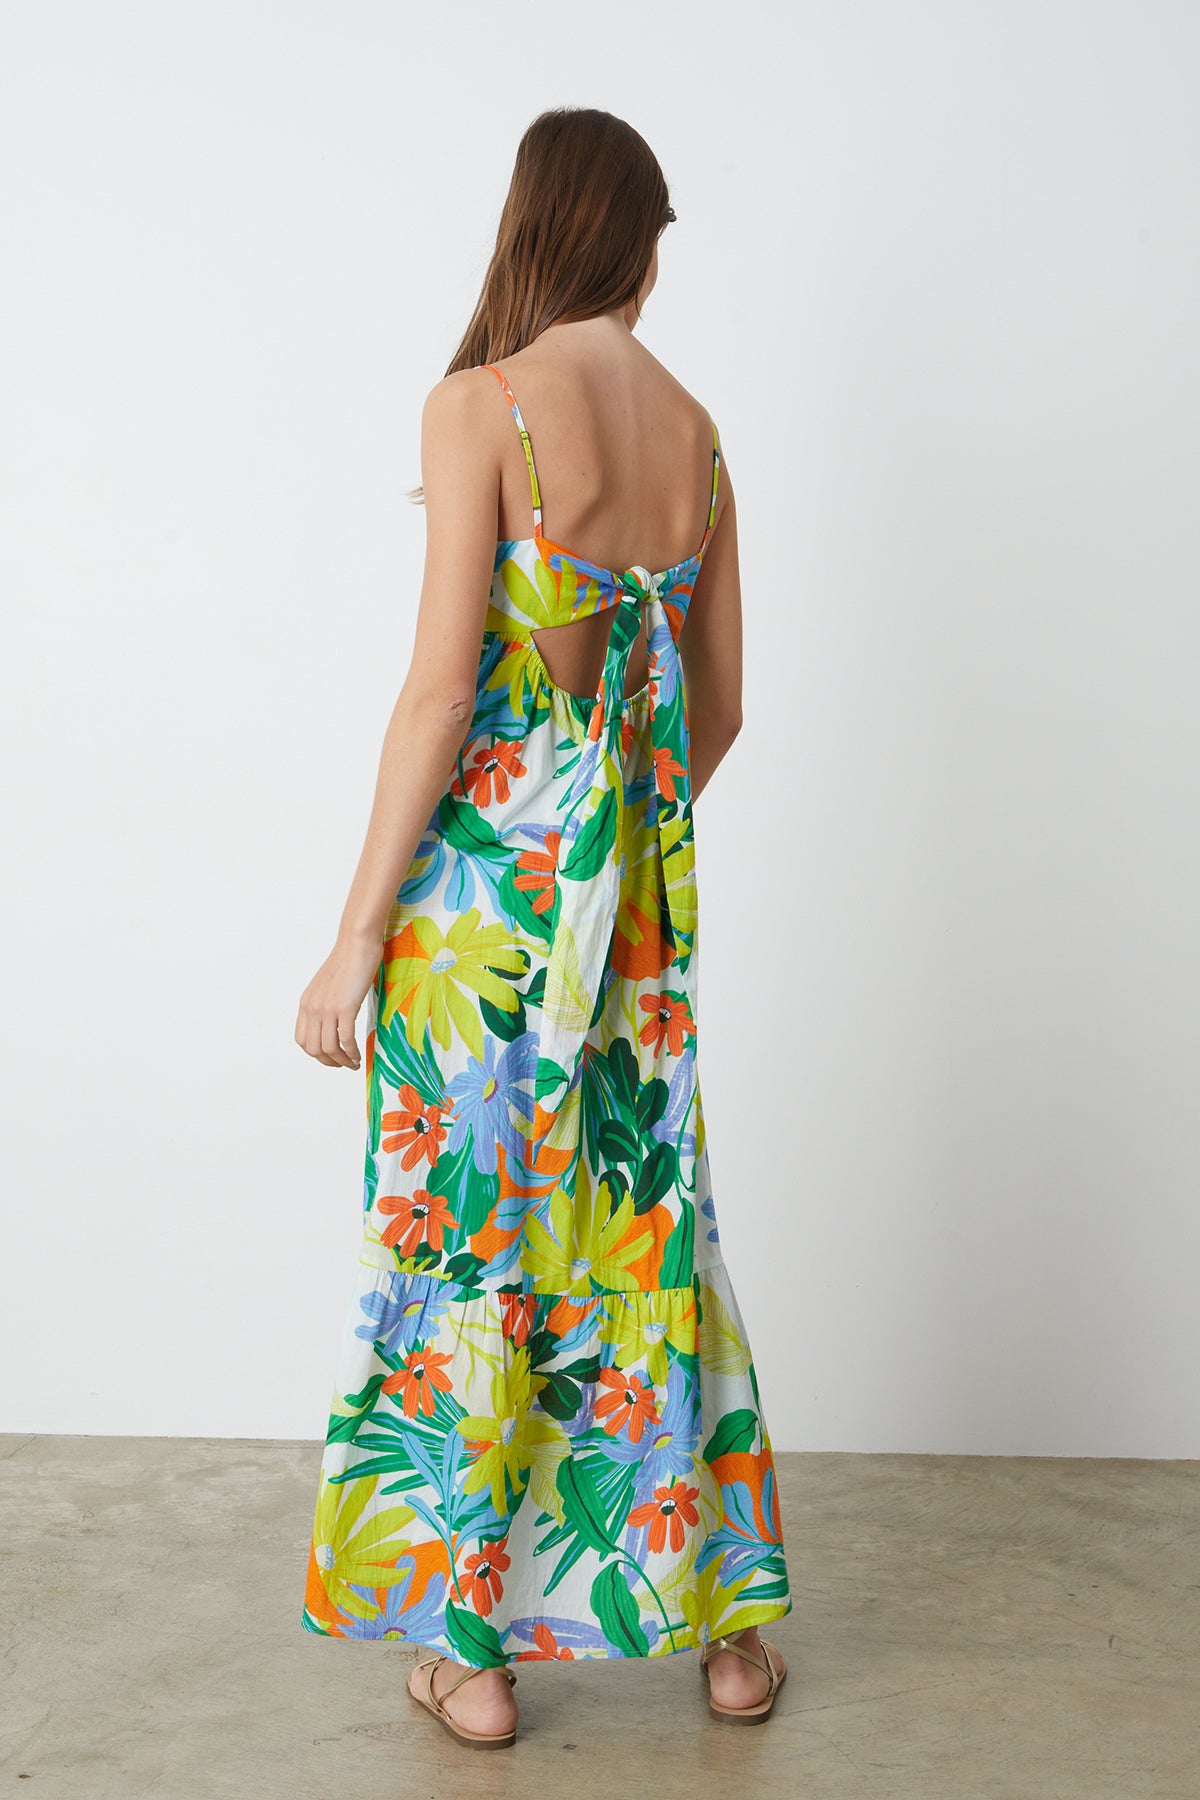 The back view of a woman wearing a Velvet by Graham & Spencer KAYLA PRINTED MAXI DRESS.-26342715588801